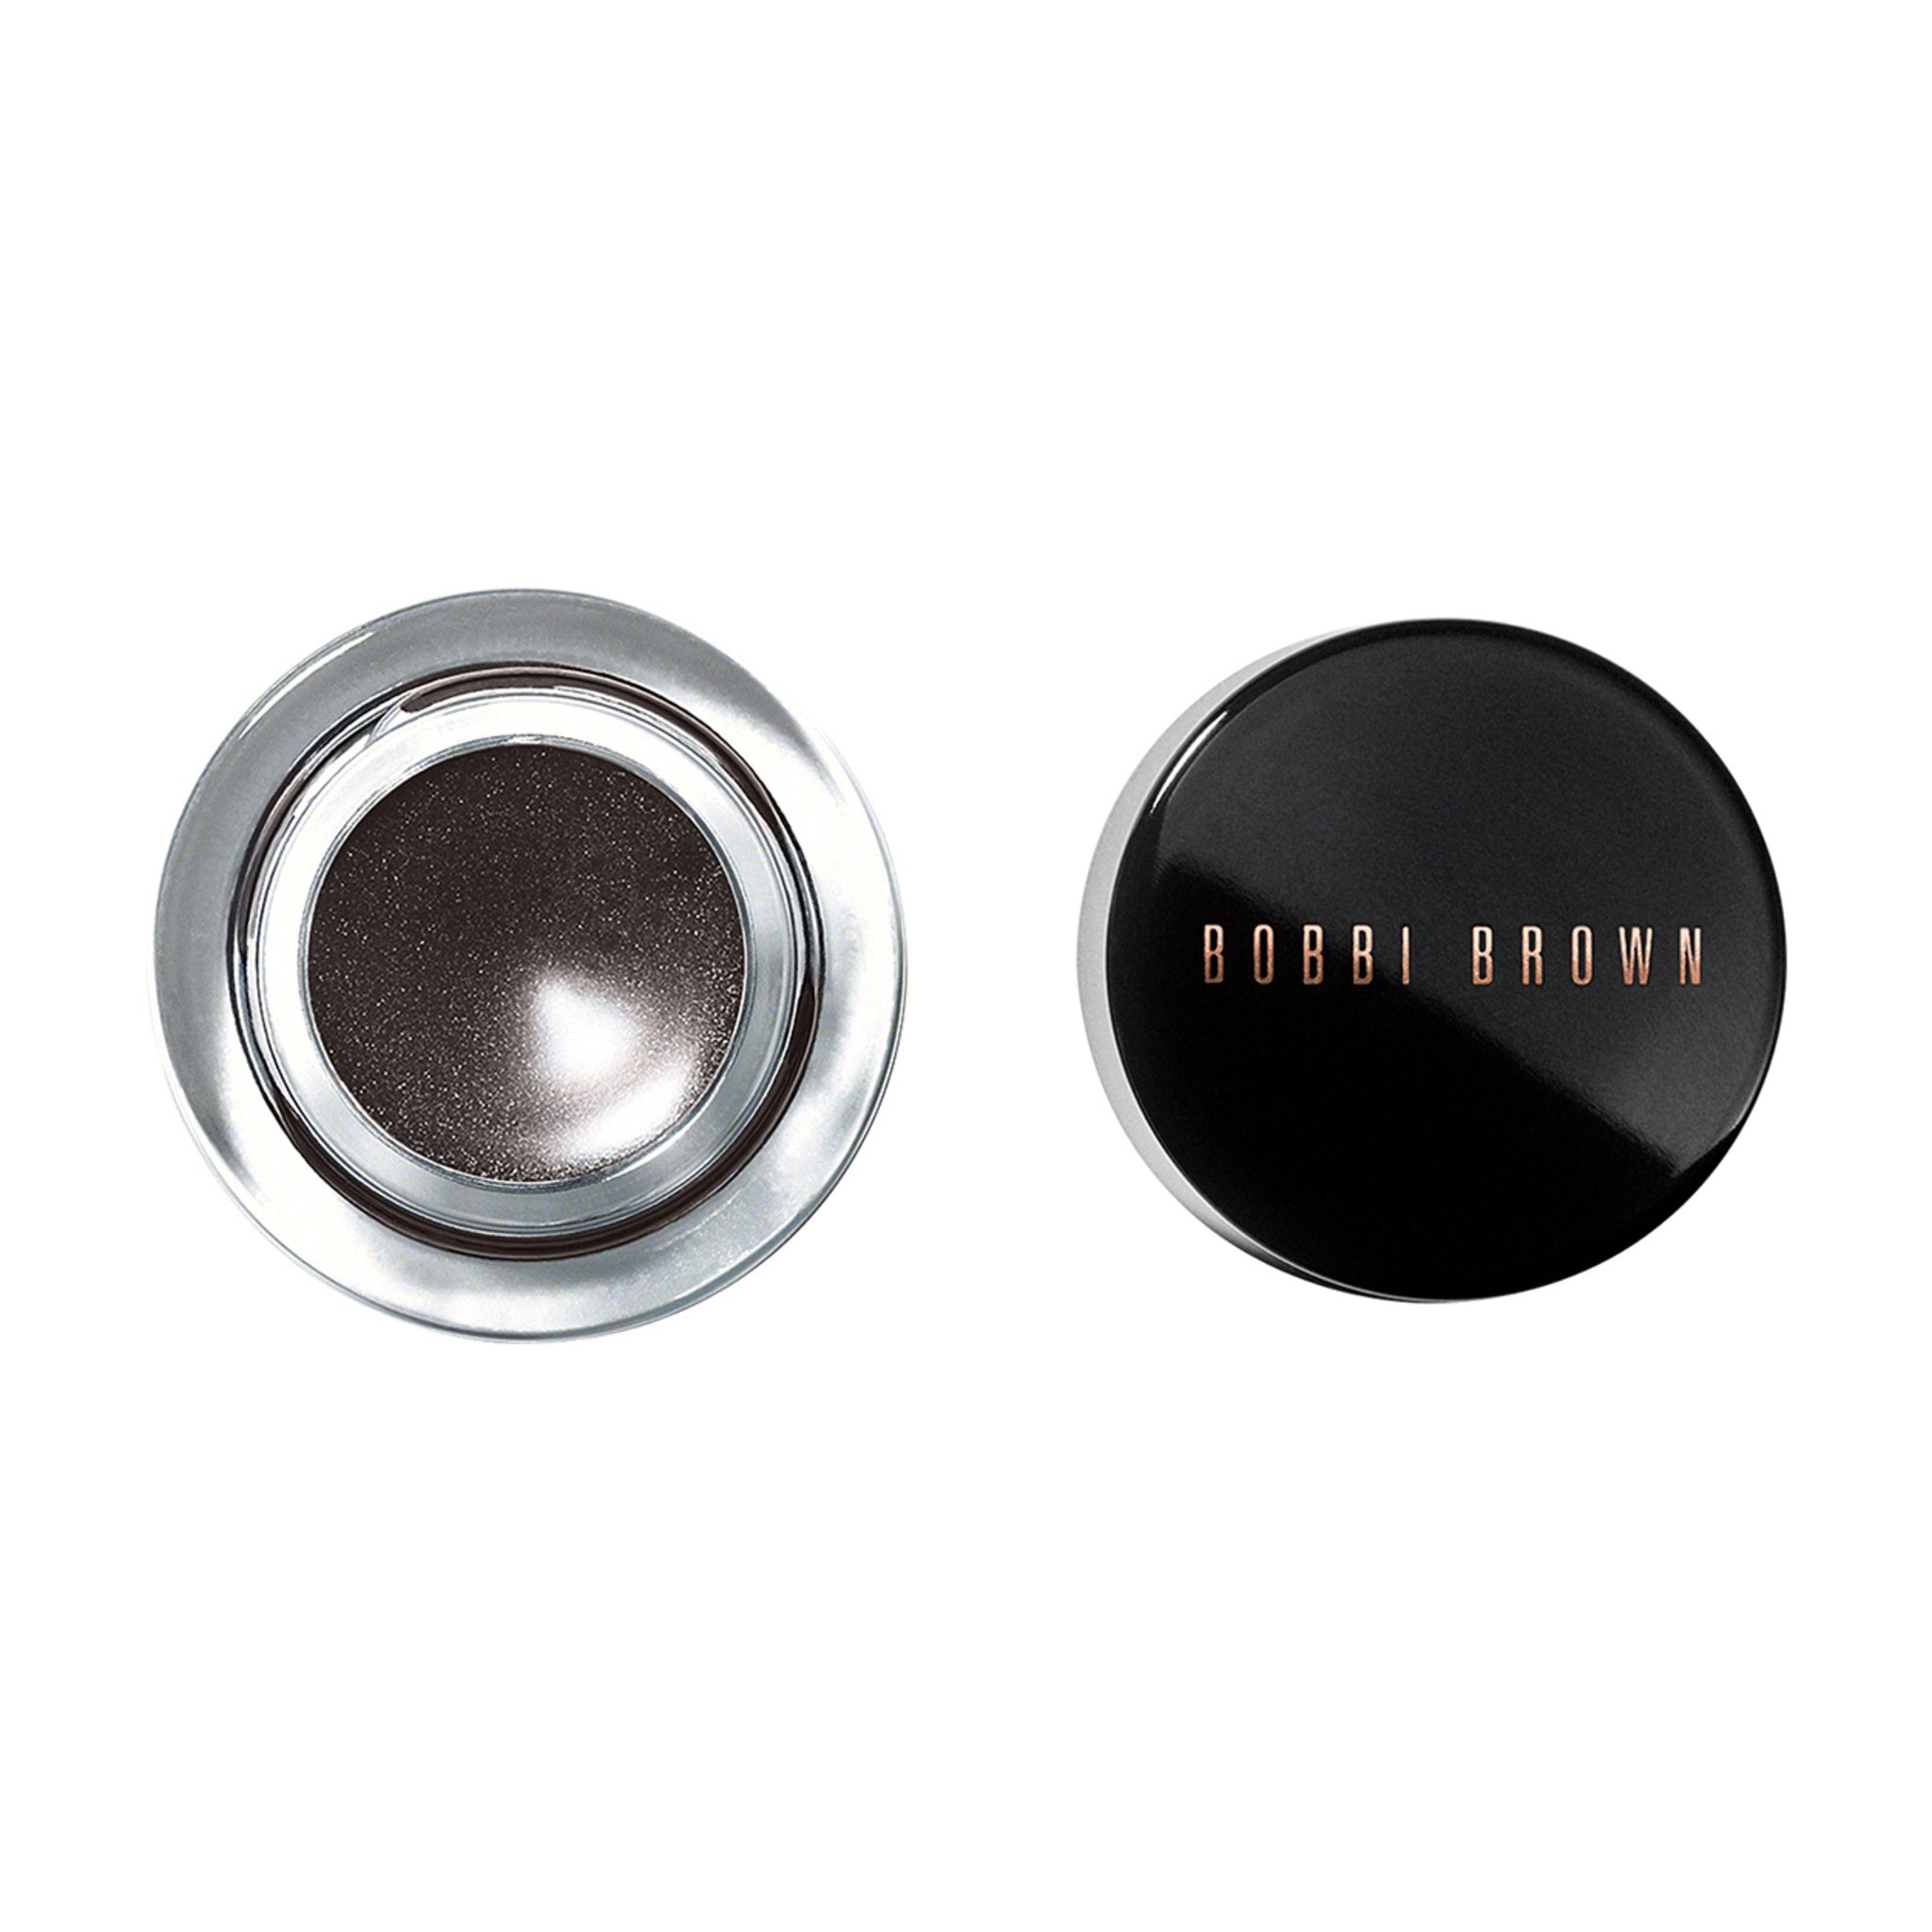 Bobbi Brown Long Wear Gel Eyeliner Color/Shade variant: Caviar Ink main image. This product is in the color black